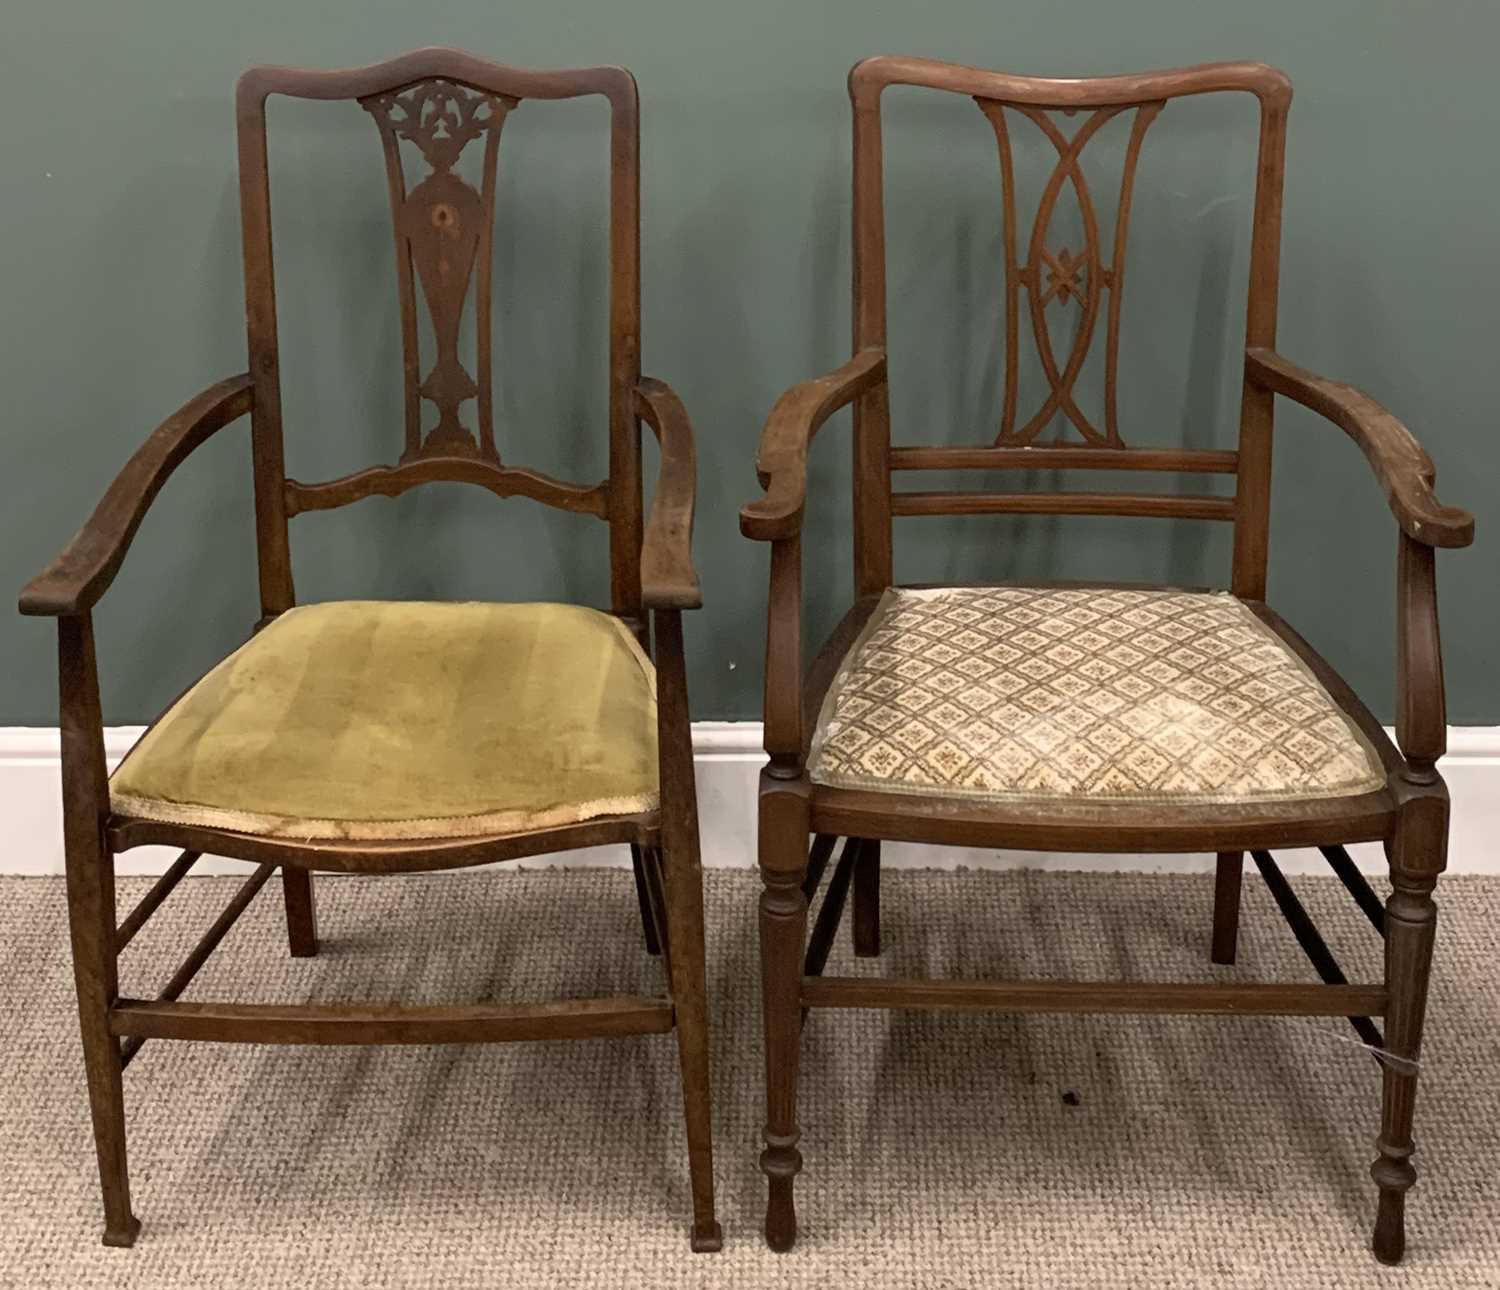 ASSORTED VINTAGE CHAIRS including pair of polished and twist carvers, two inlaid parlour chairs, two - Image 2 of 5